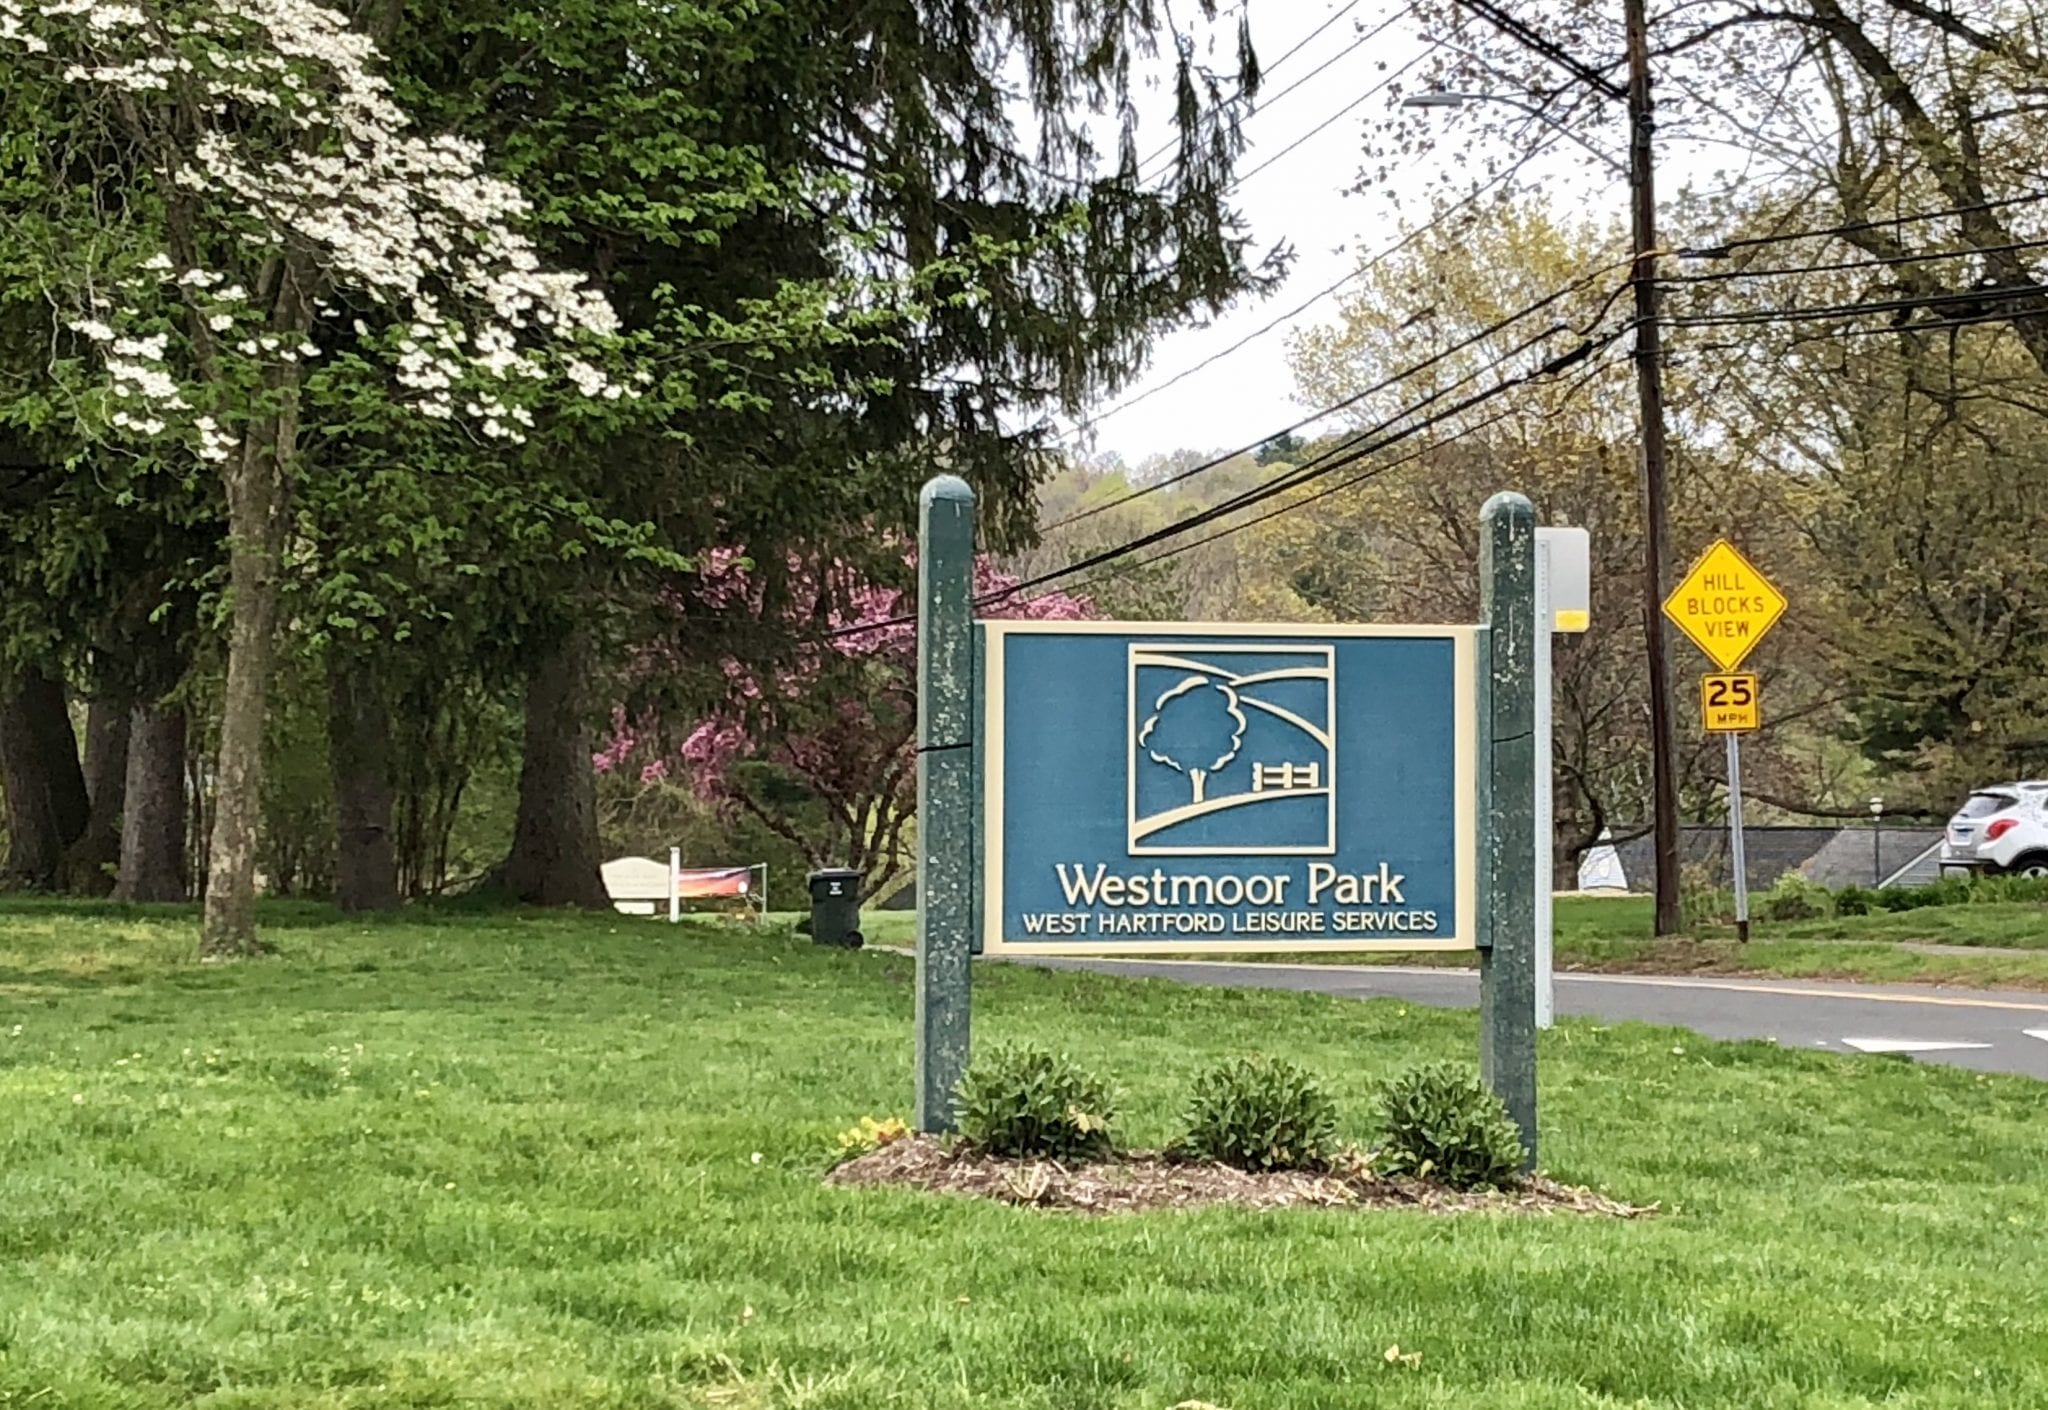 West Hartford Leisure Services to Offer Several Camps, Other Park